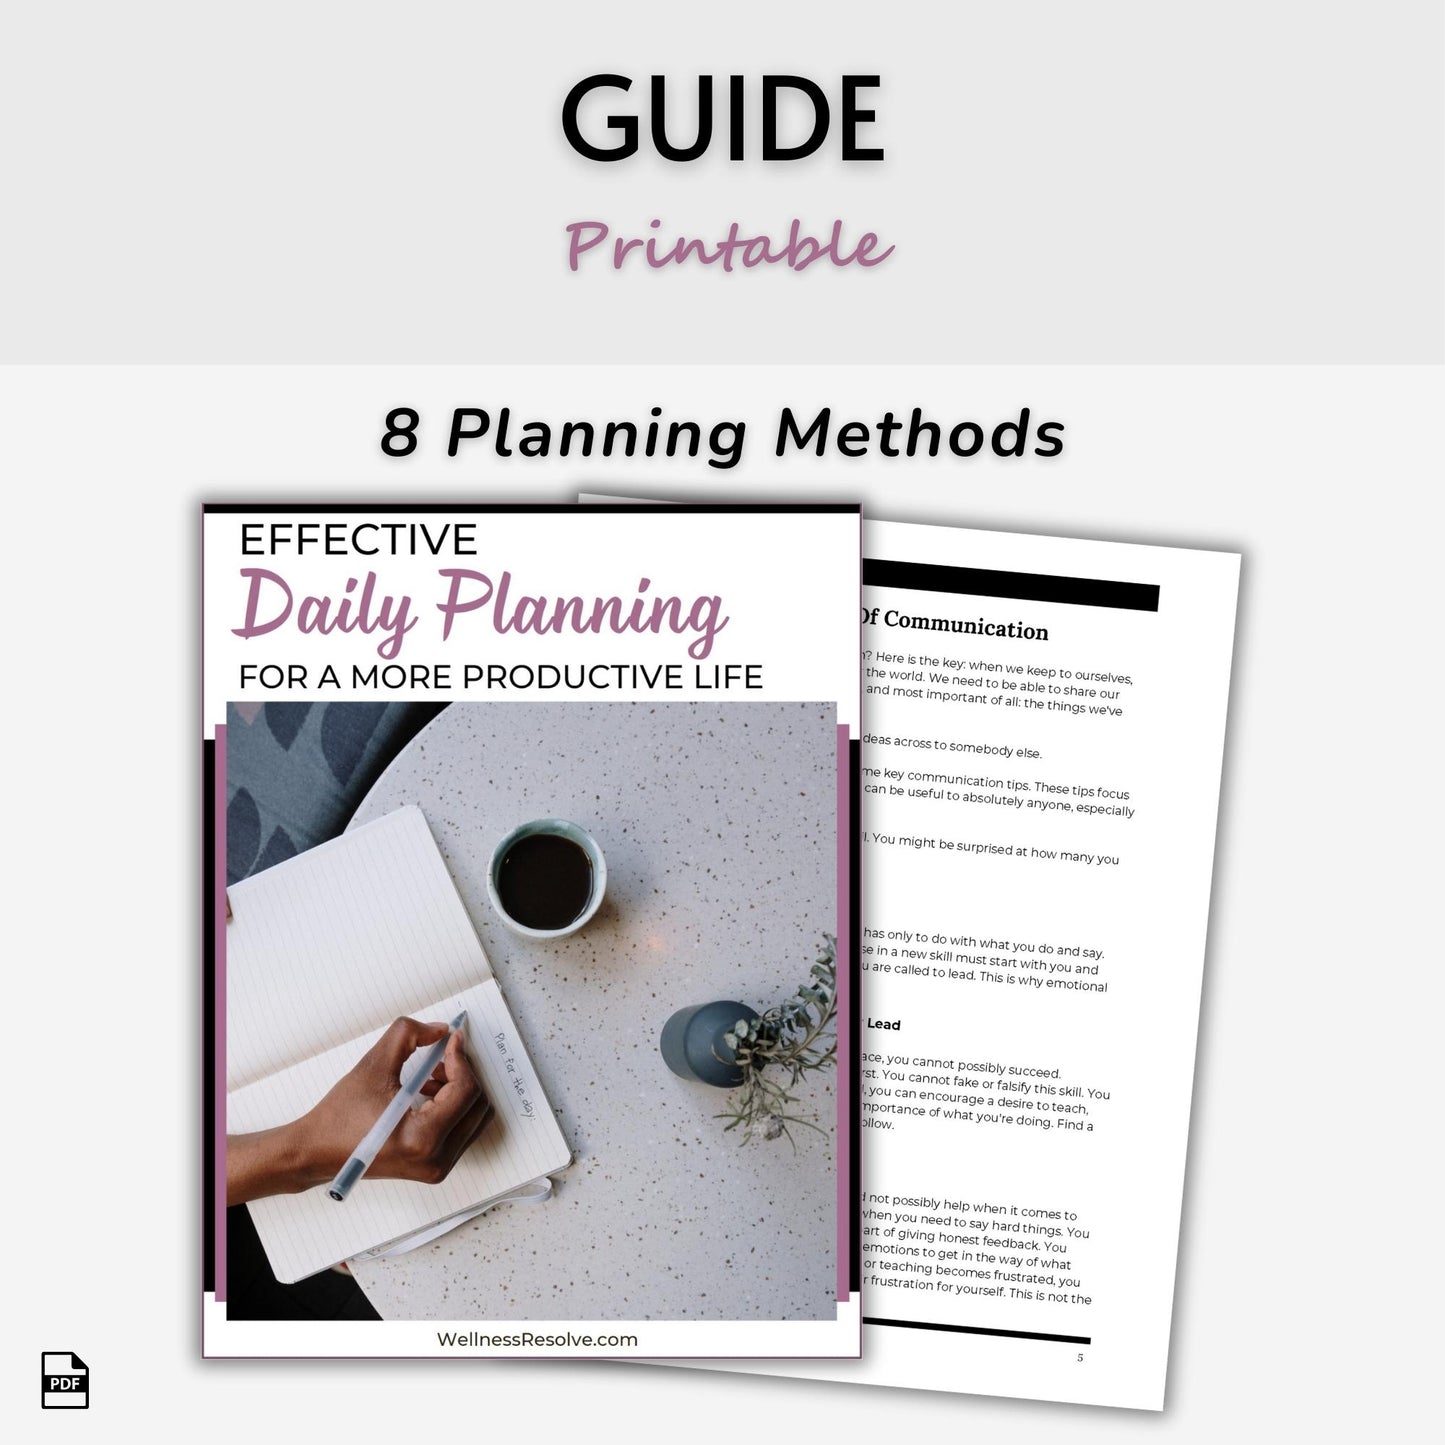 Effective Daily Planning For A More Productive Life